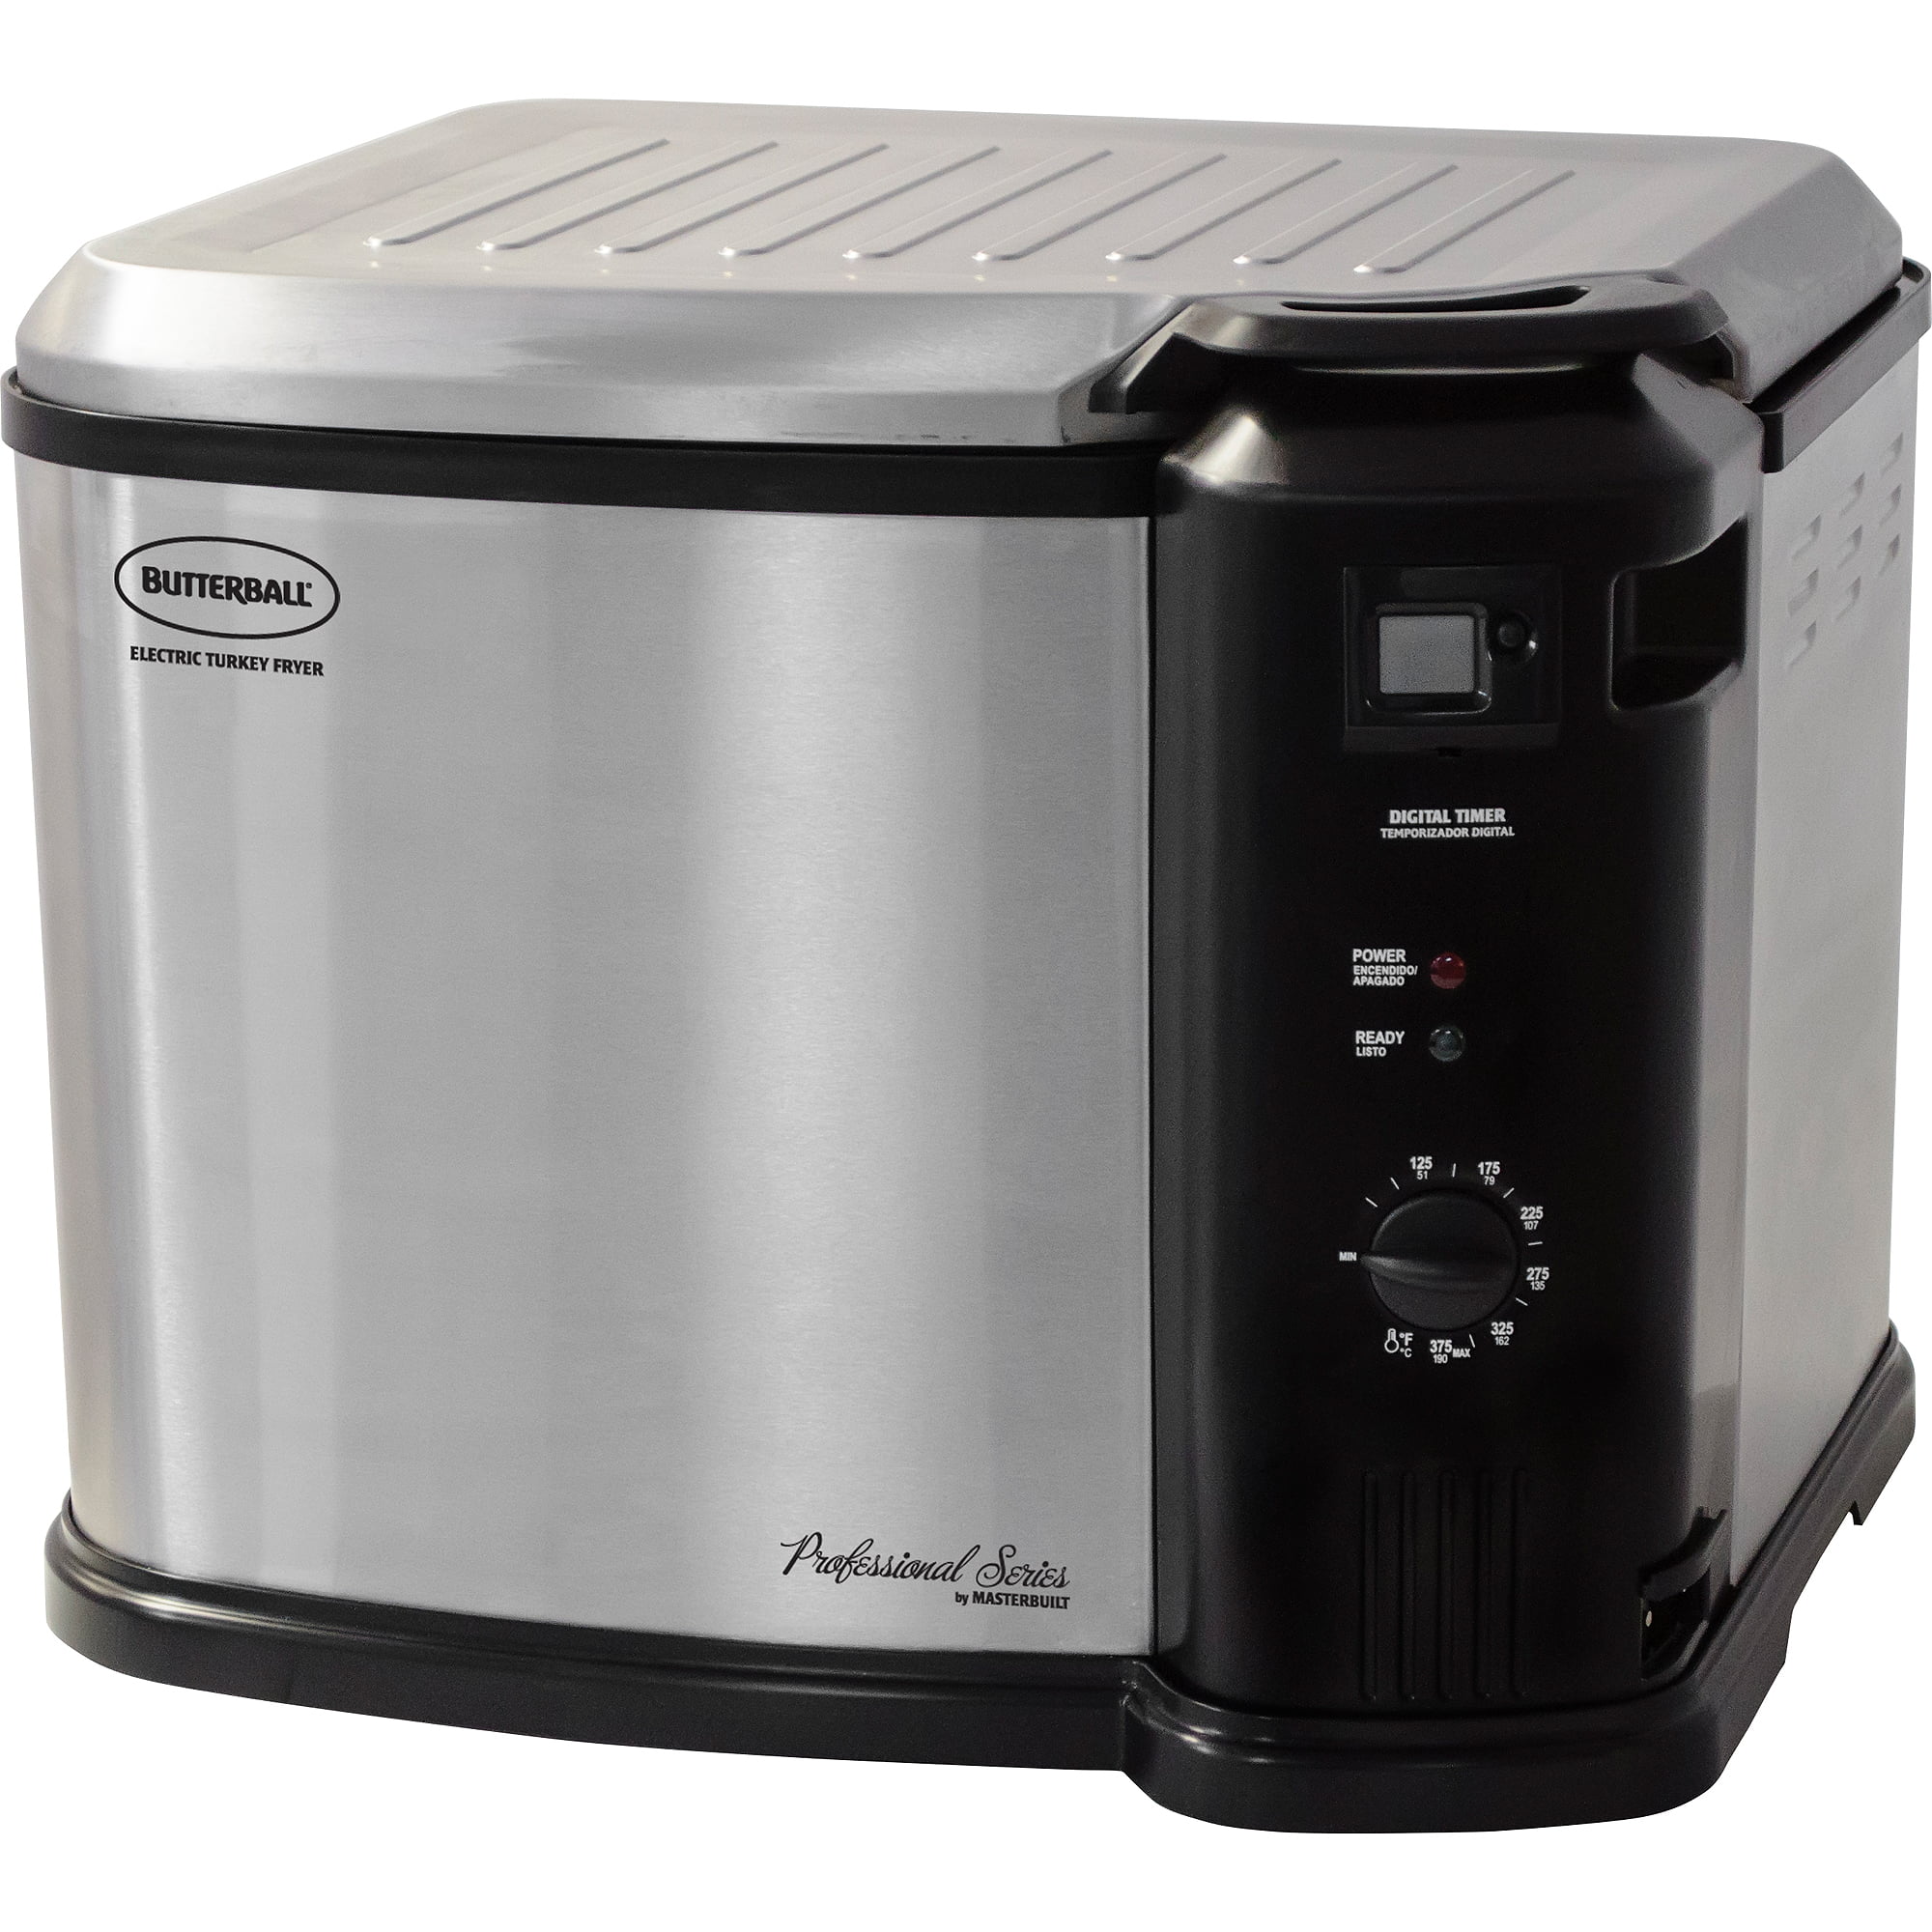 Butterball XL Electric Fryer, Stainless Steel, 2015 model